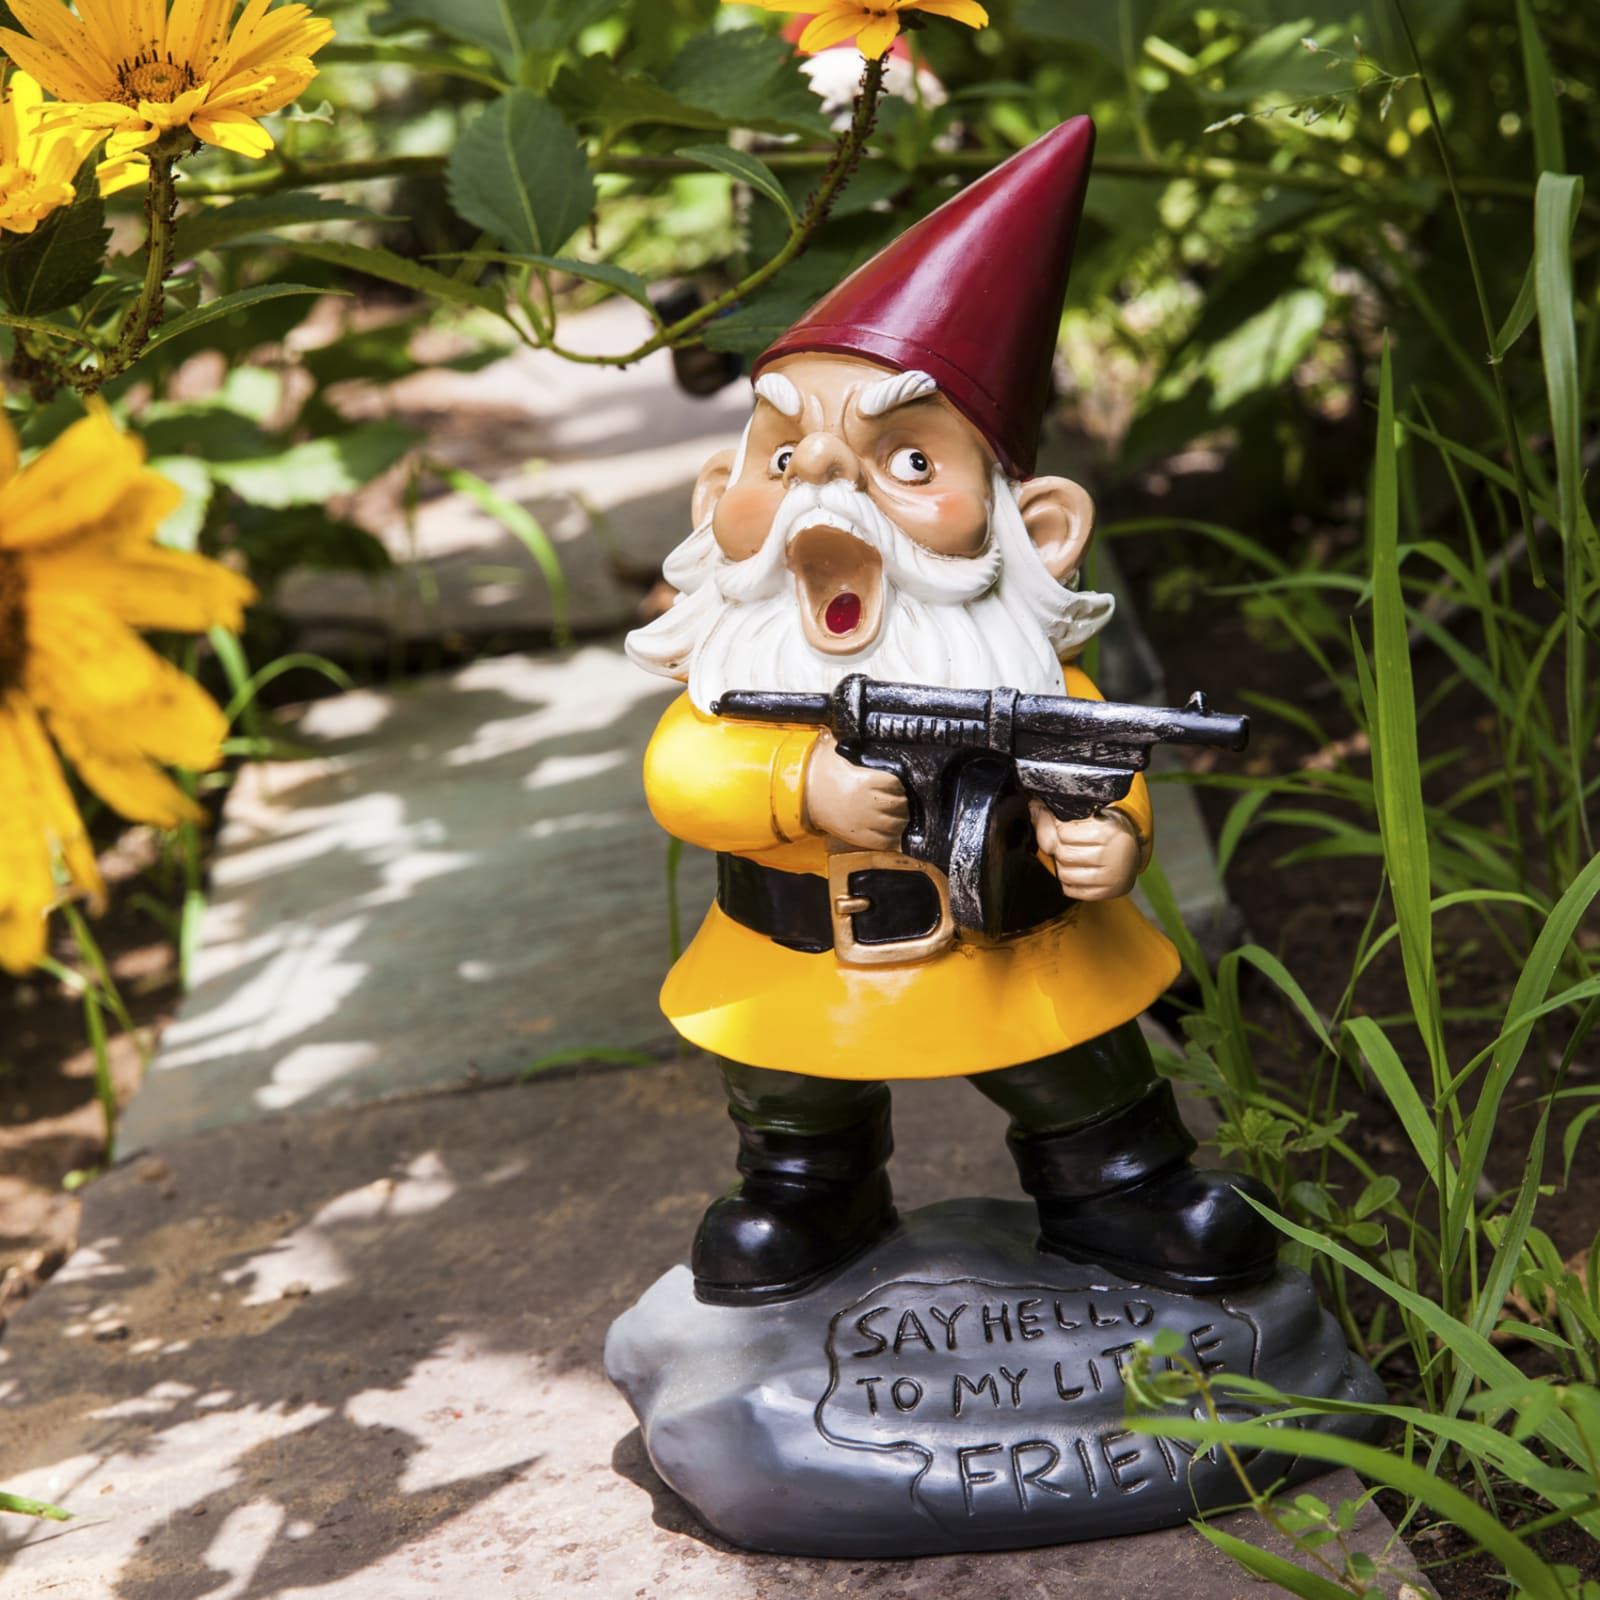 The Angry Little Garden Gnome